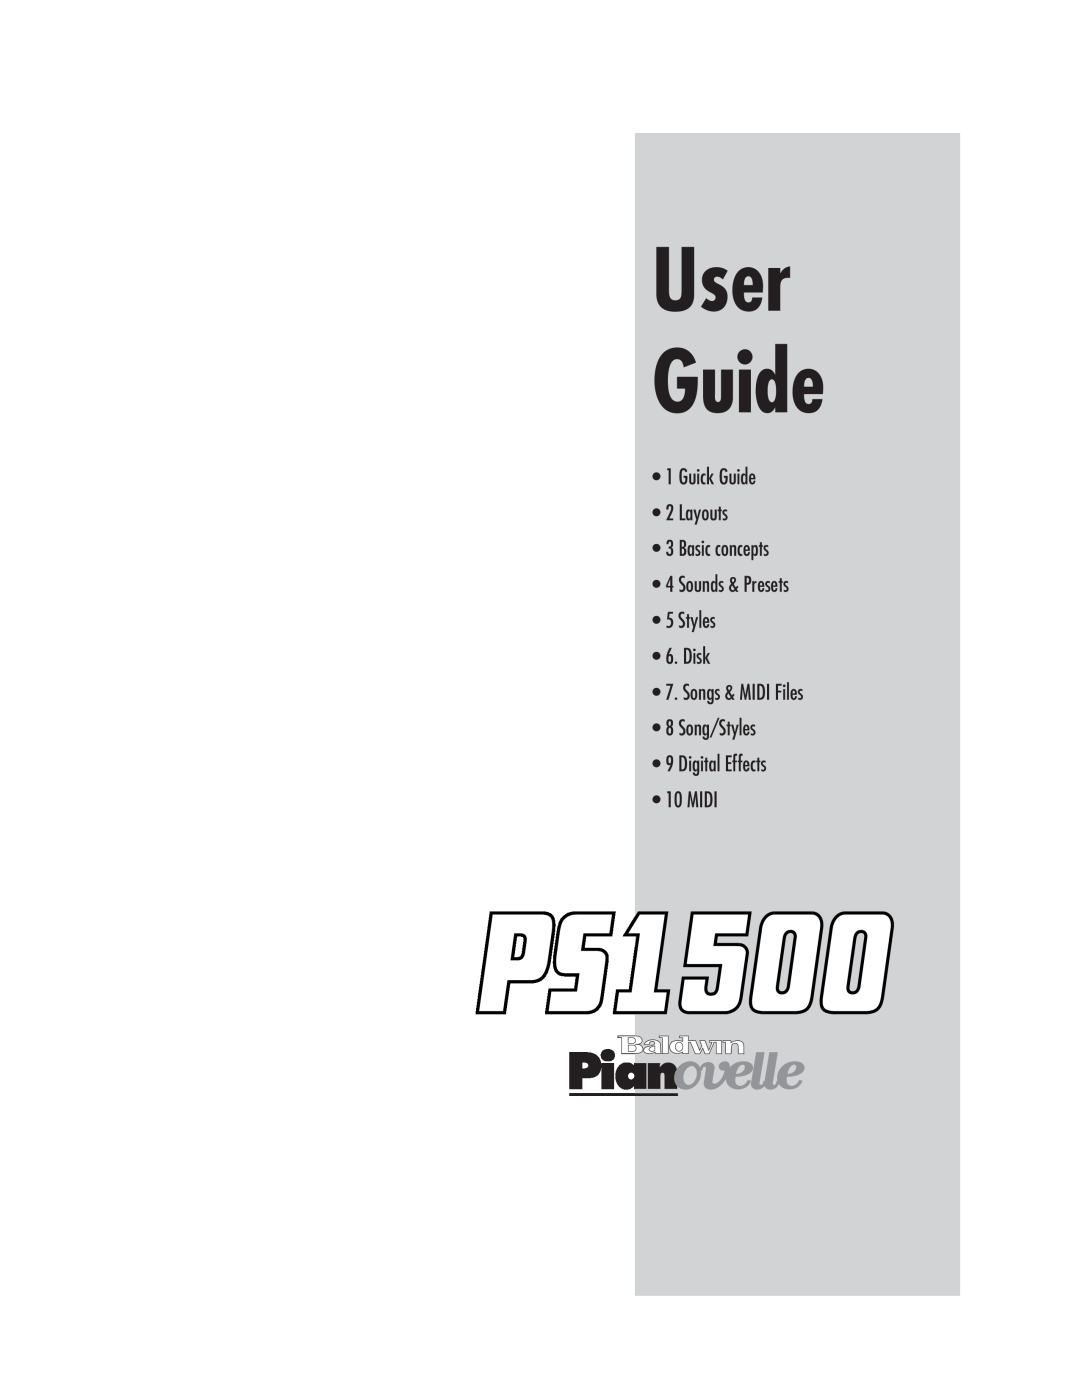 IBM PS1500 Guick Guide 2 Layouts 3 Basic concepts, Sounds & Presets 5 Styles 6. Disk, Songs & MIDI Files 8 Song/Styles 